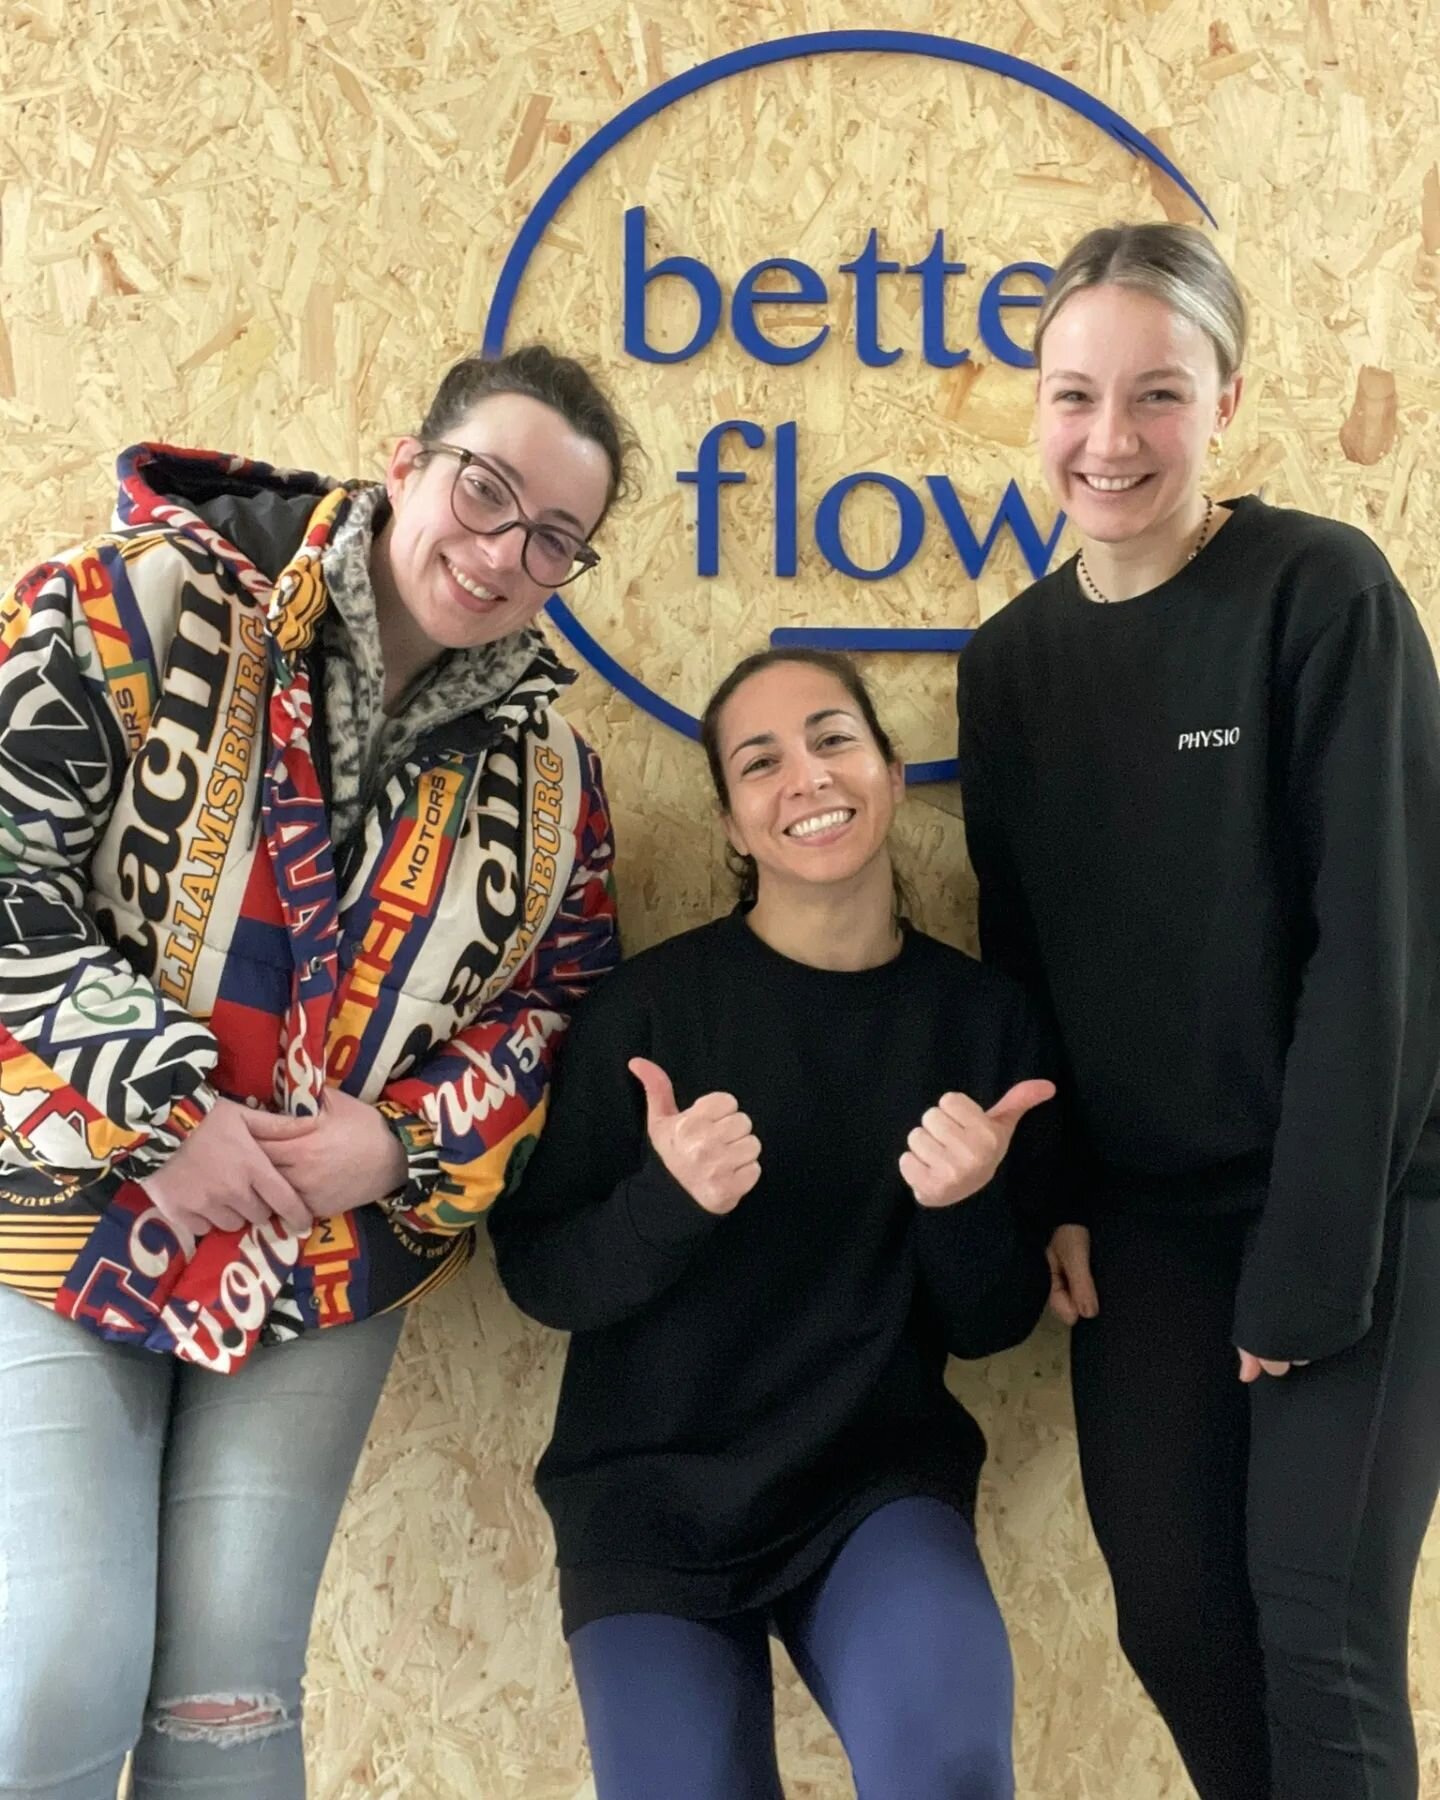 #halloffame
Liz is one of our regular patients at better flow! I bet she wishes she wasn't , but she takes care of herself and we are here to help! 
Thanks for trusting us, we are with you every step of the way 💪

#physiolondon #fightzonelondon #bet